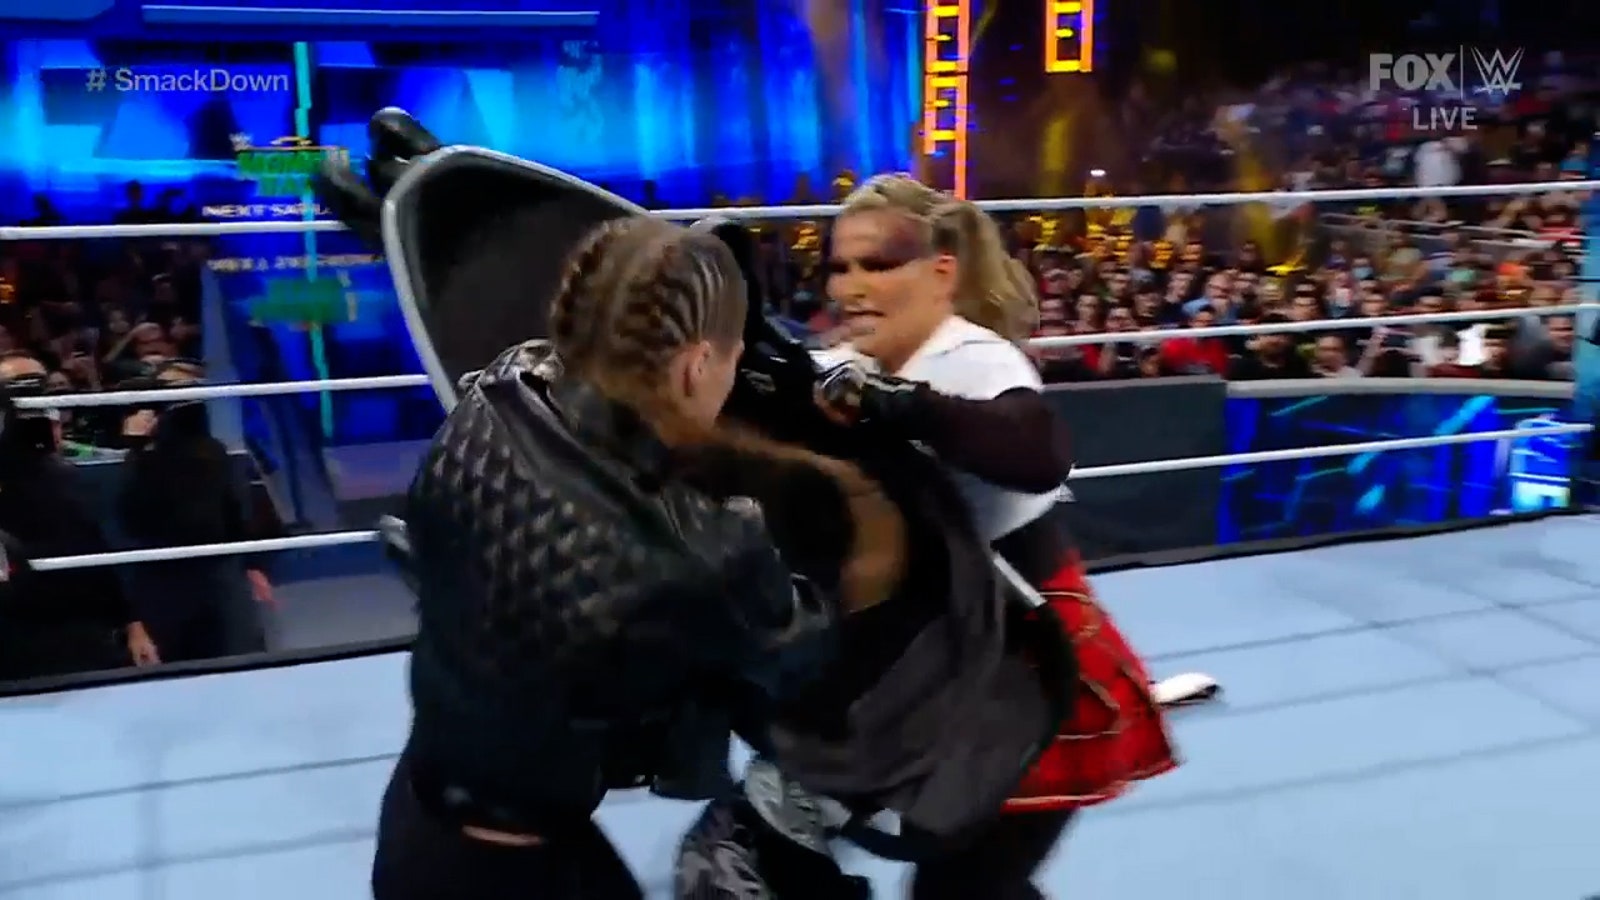 Natalya impersonates Ronda Rousey ahead of MITB and pays the price